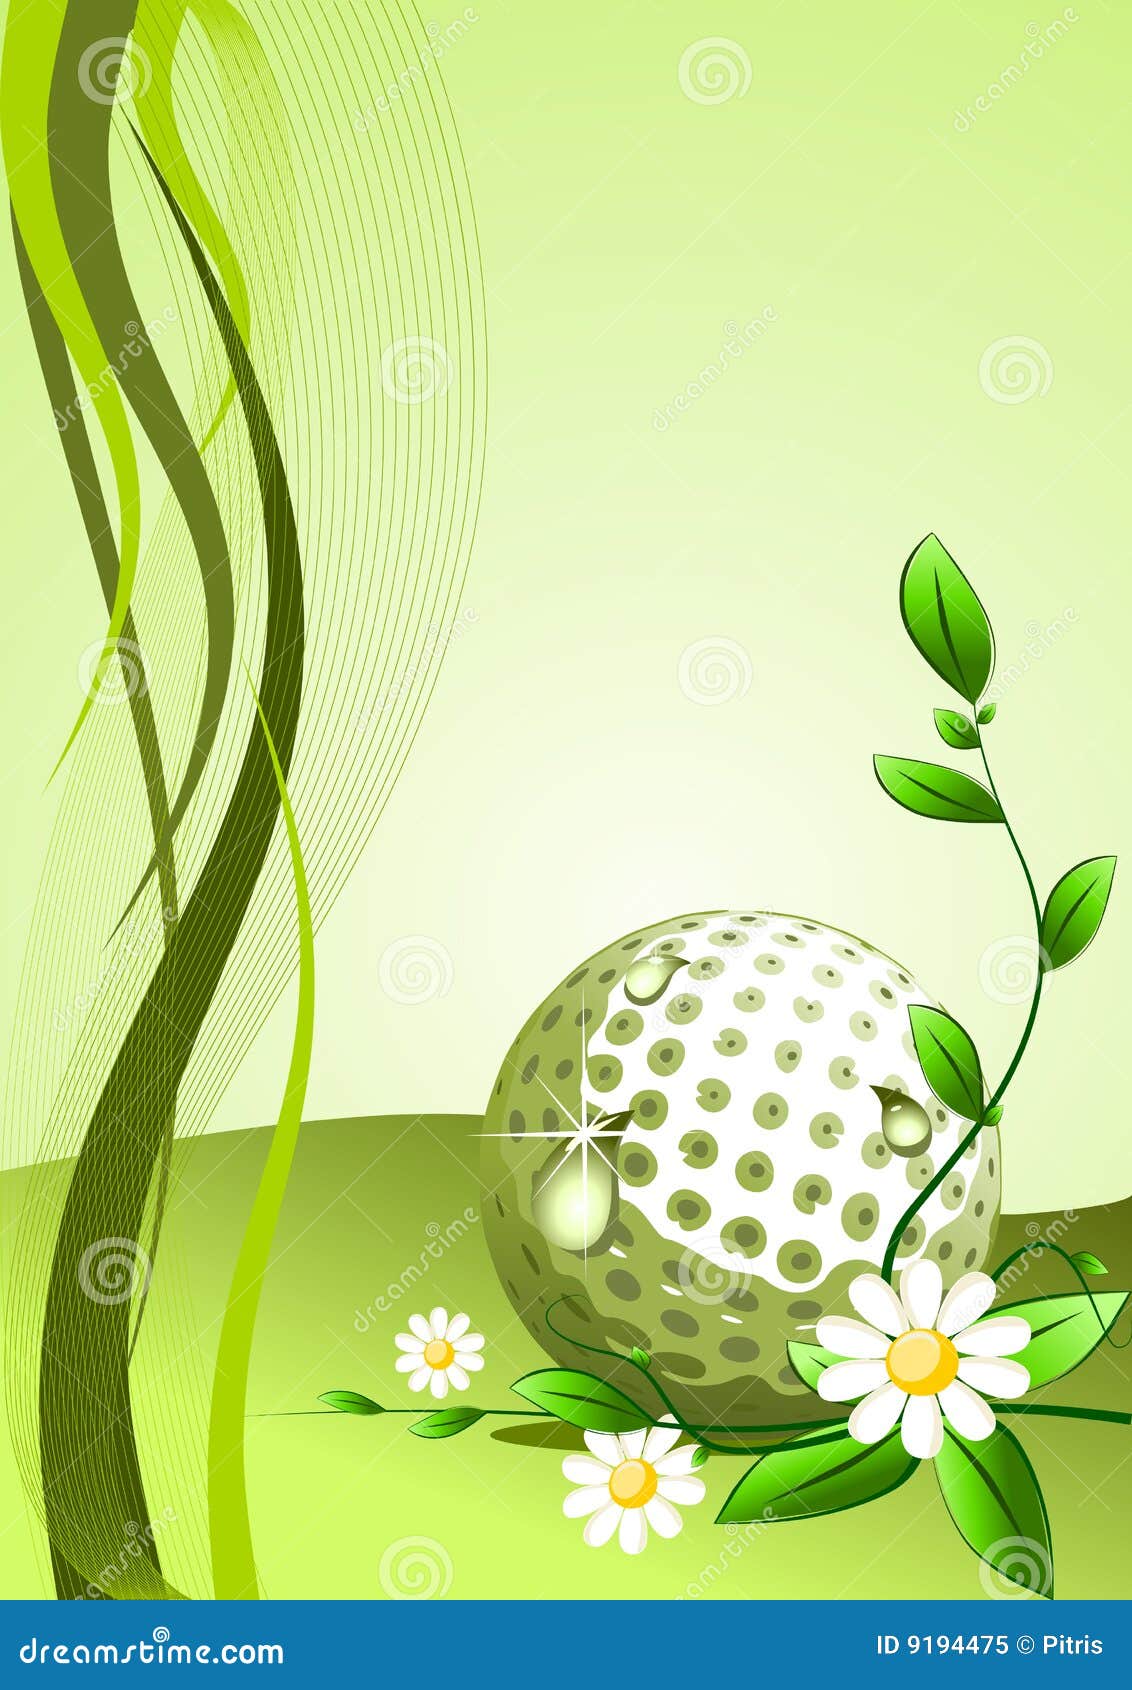 free golf themed clipart - photo #27